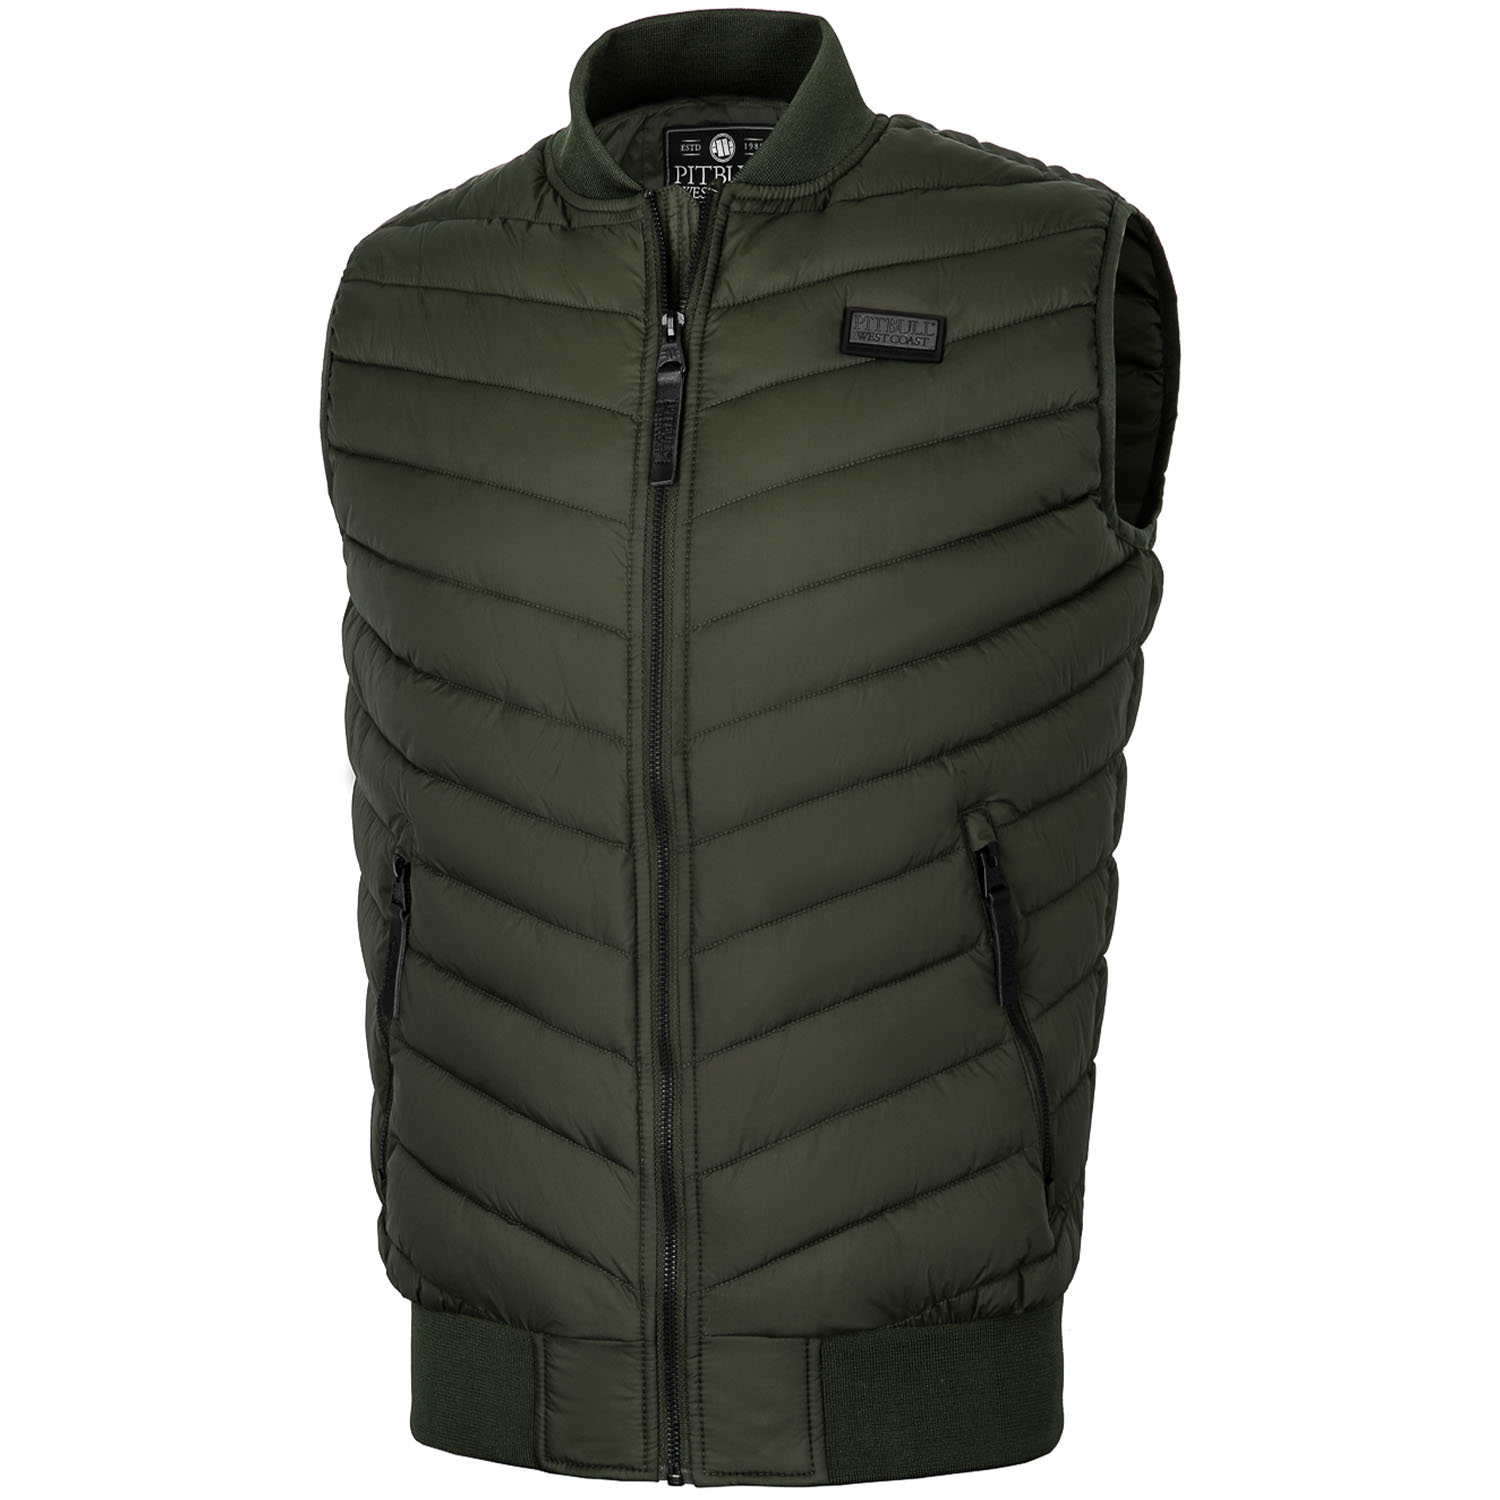 Pit Bull West Coast Weste, Quilted Halley, olive